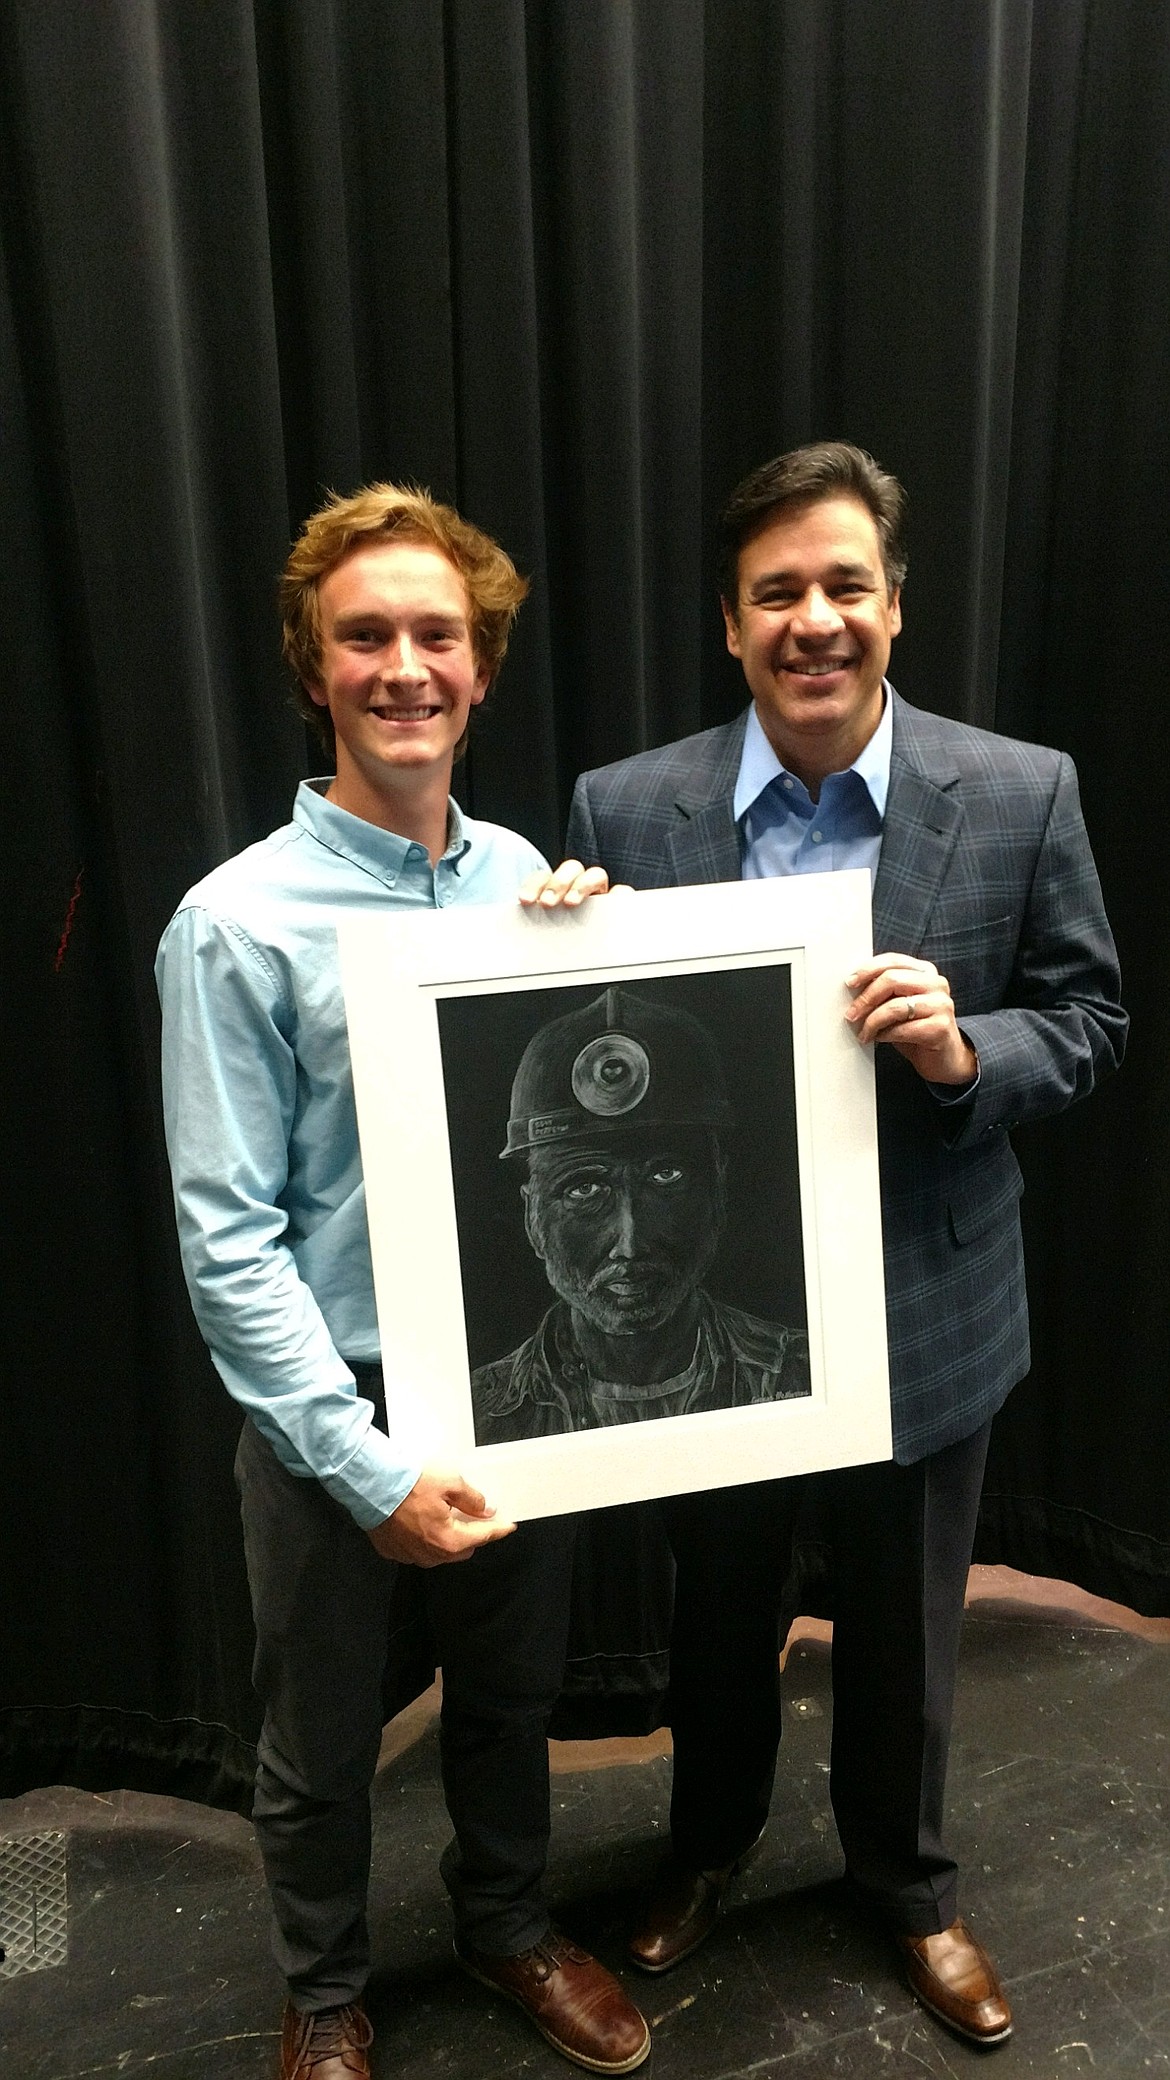 Courtesy photo
Coeur d'Alene High junior Connor McMurray had his drawing  &quot;Coeur d' Le Mineur&quot; selected as 2017 Congressional Art Competition by Idaho congressman Raul Labrador. It will be displayed at the U.S. Capital from June 2017 to June 2018.